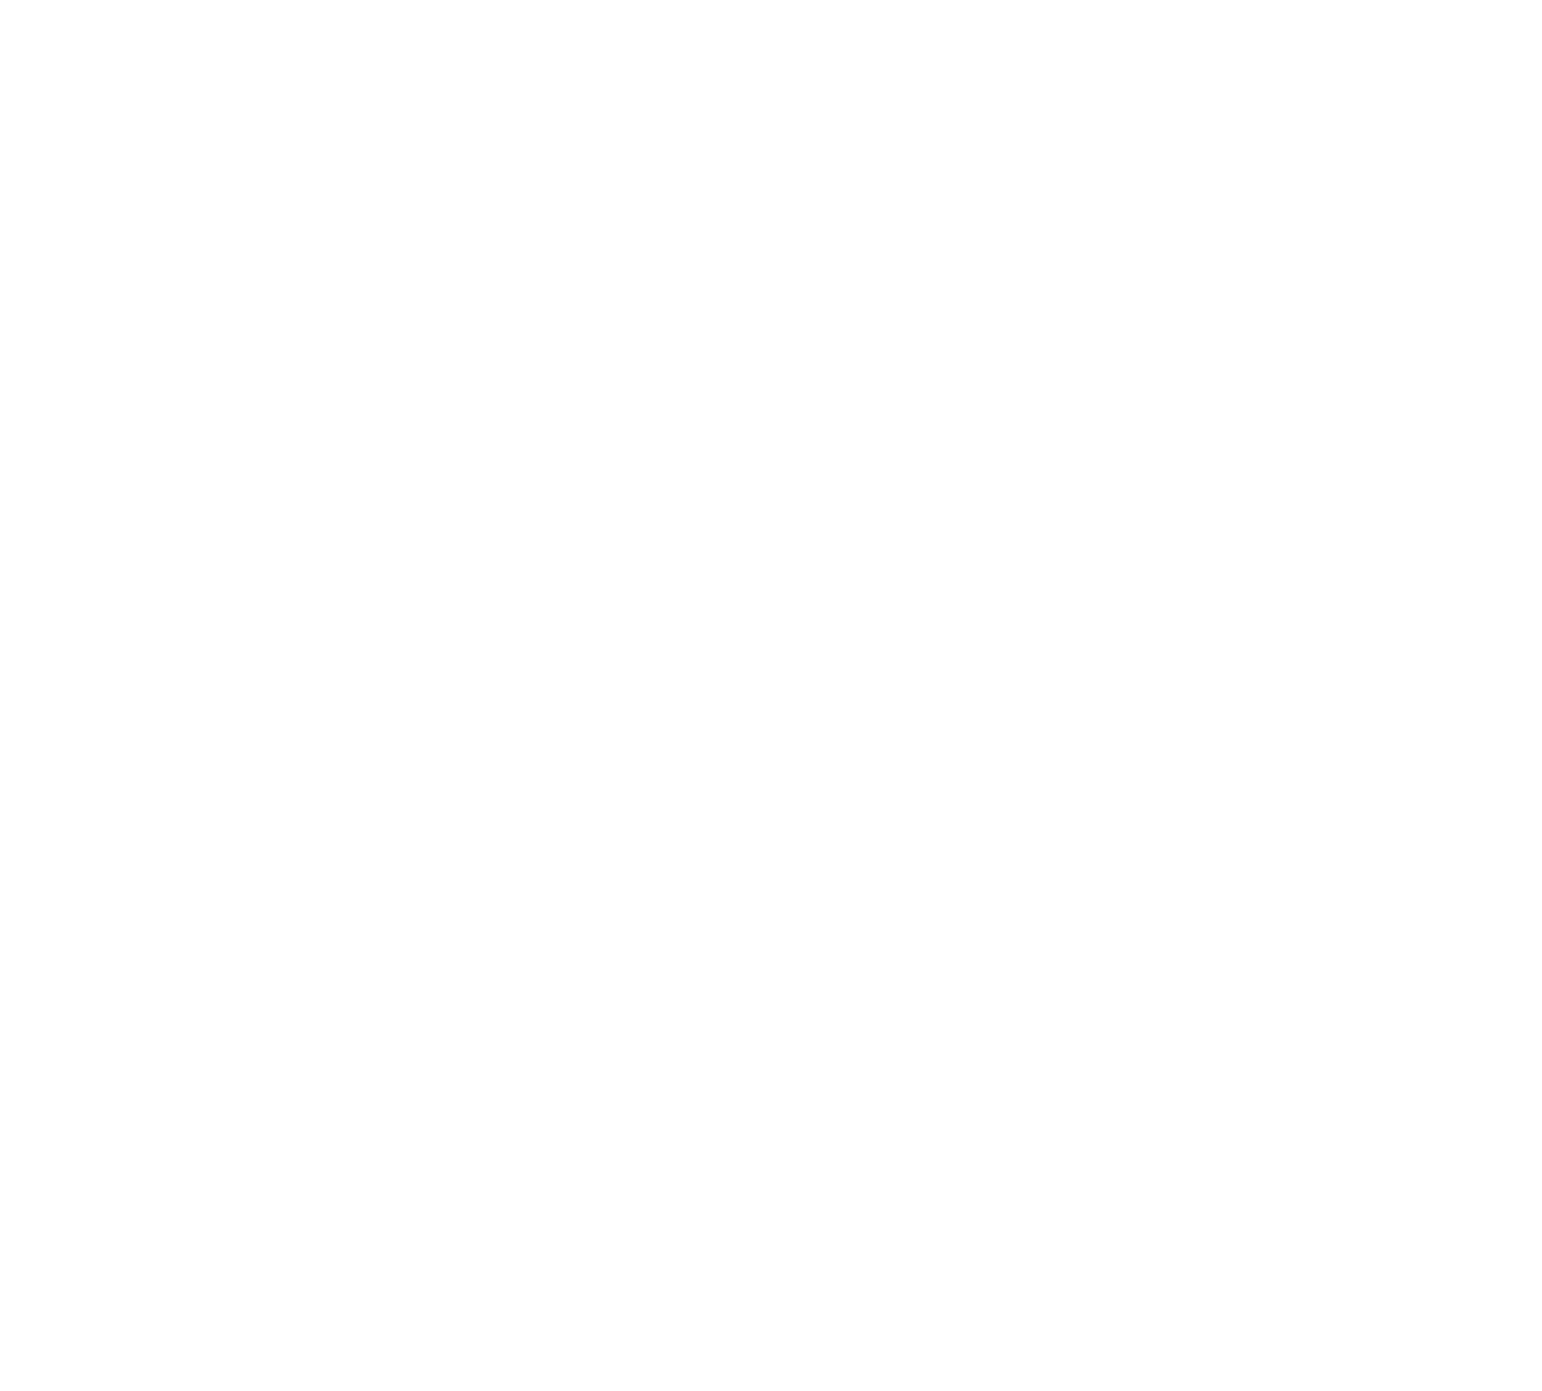 Emirates Driving Company logo for dark backgrounds (transparent PNG)